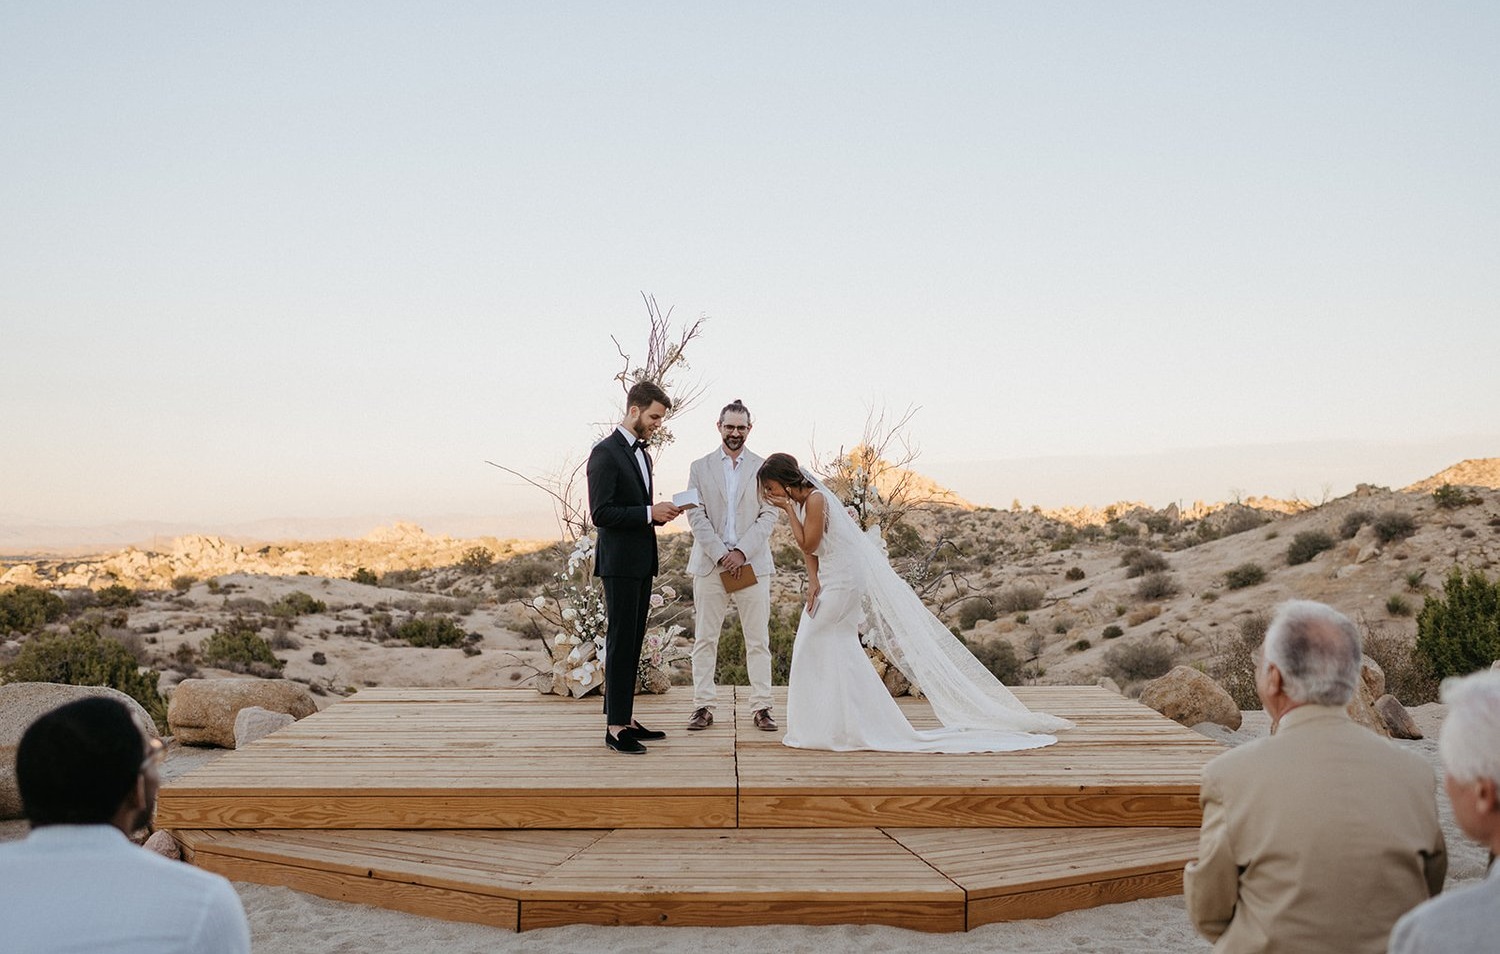 7 Tips for Elopement Weddings for Two